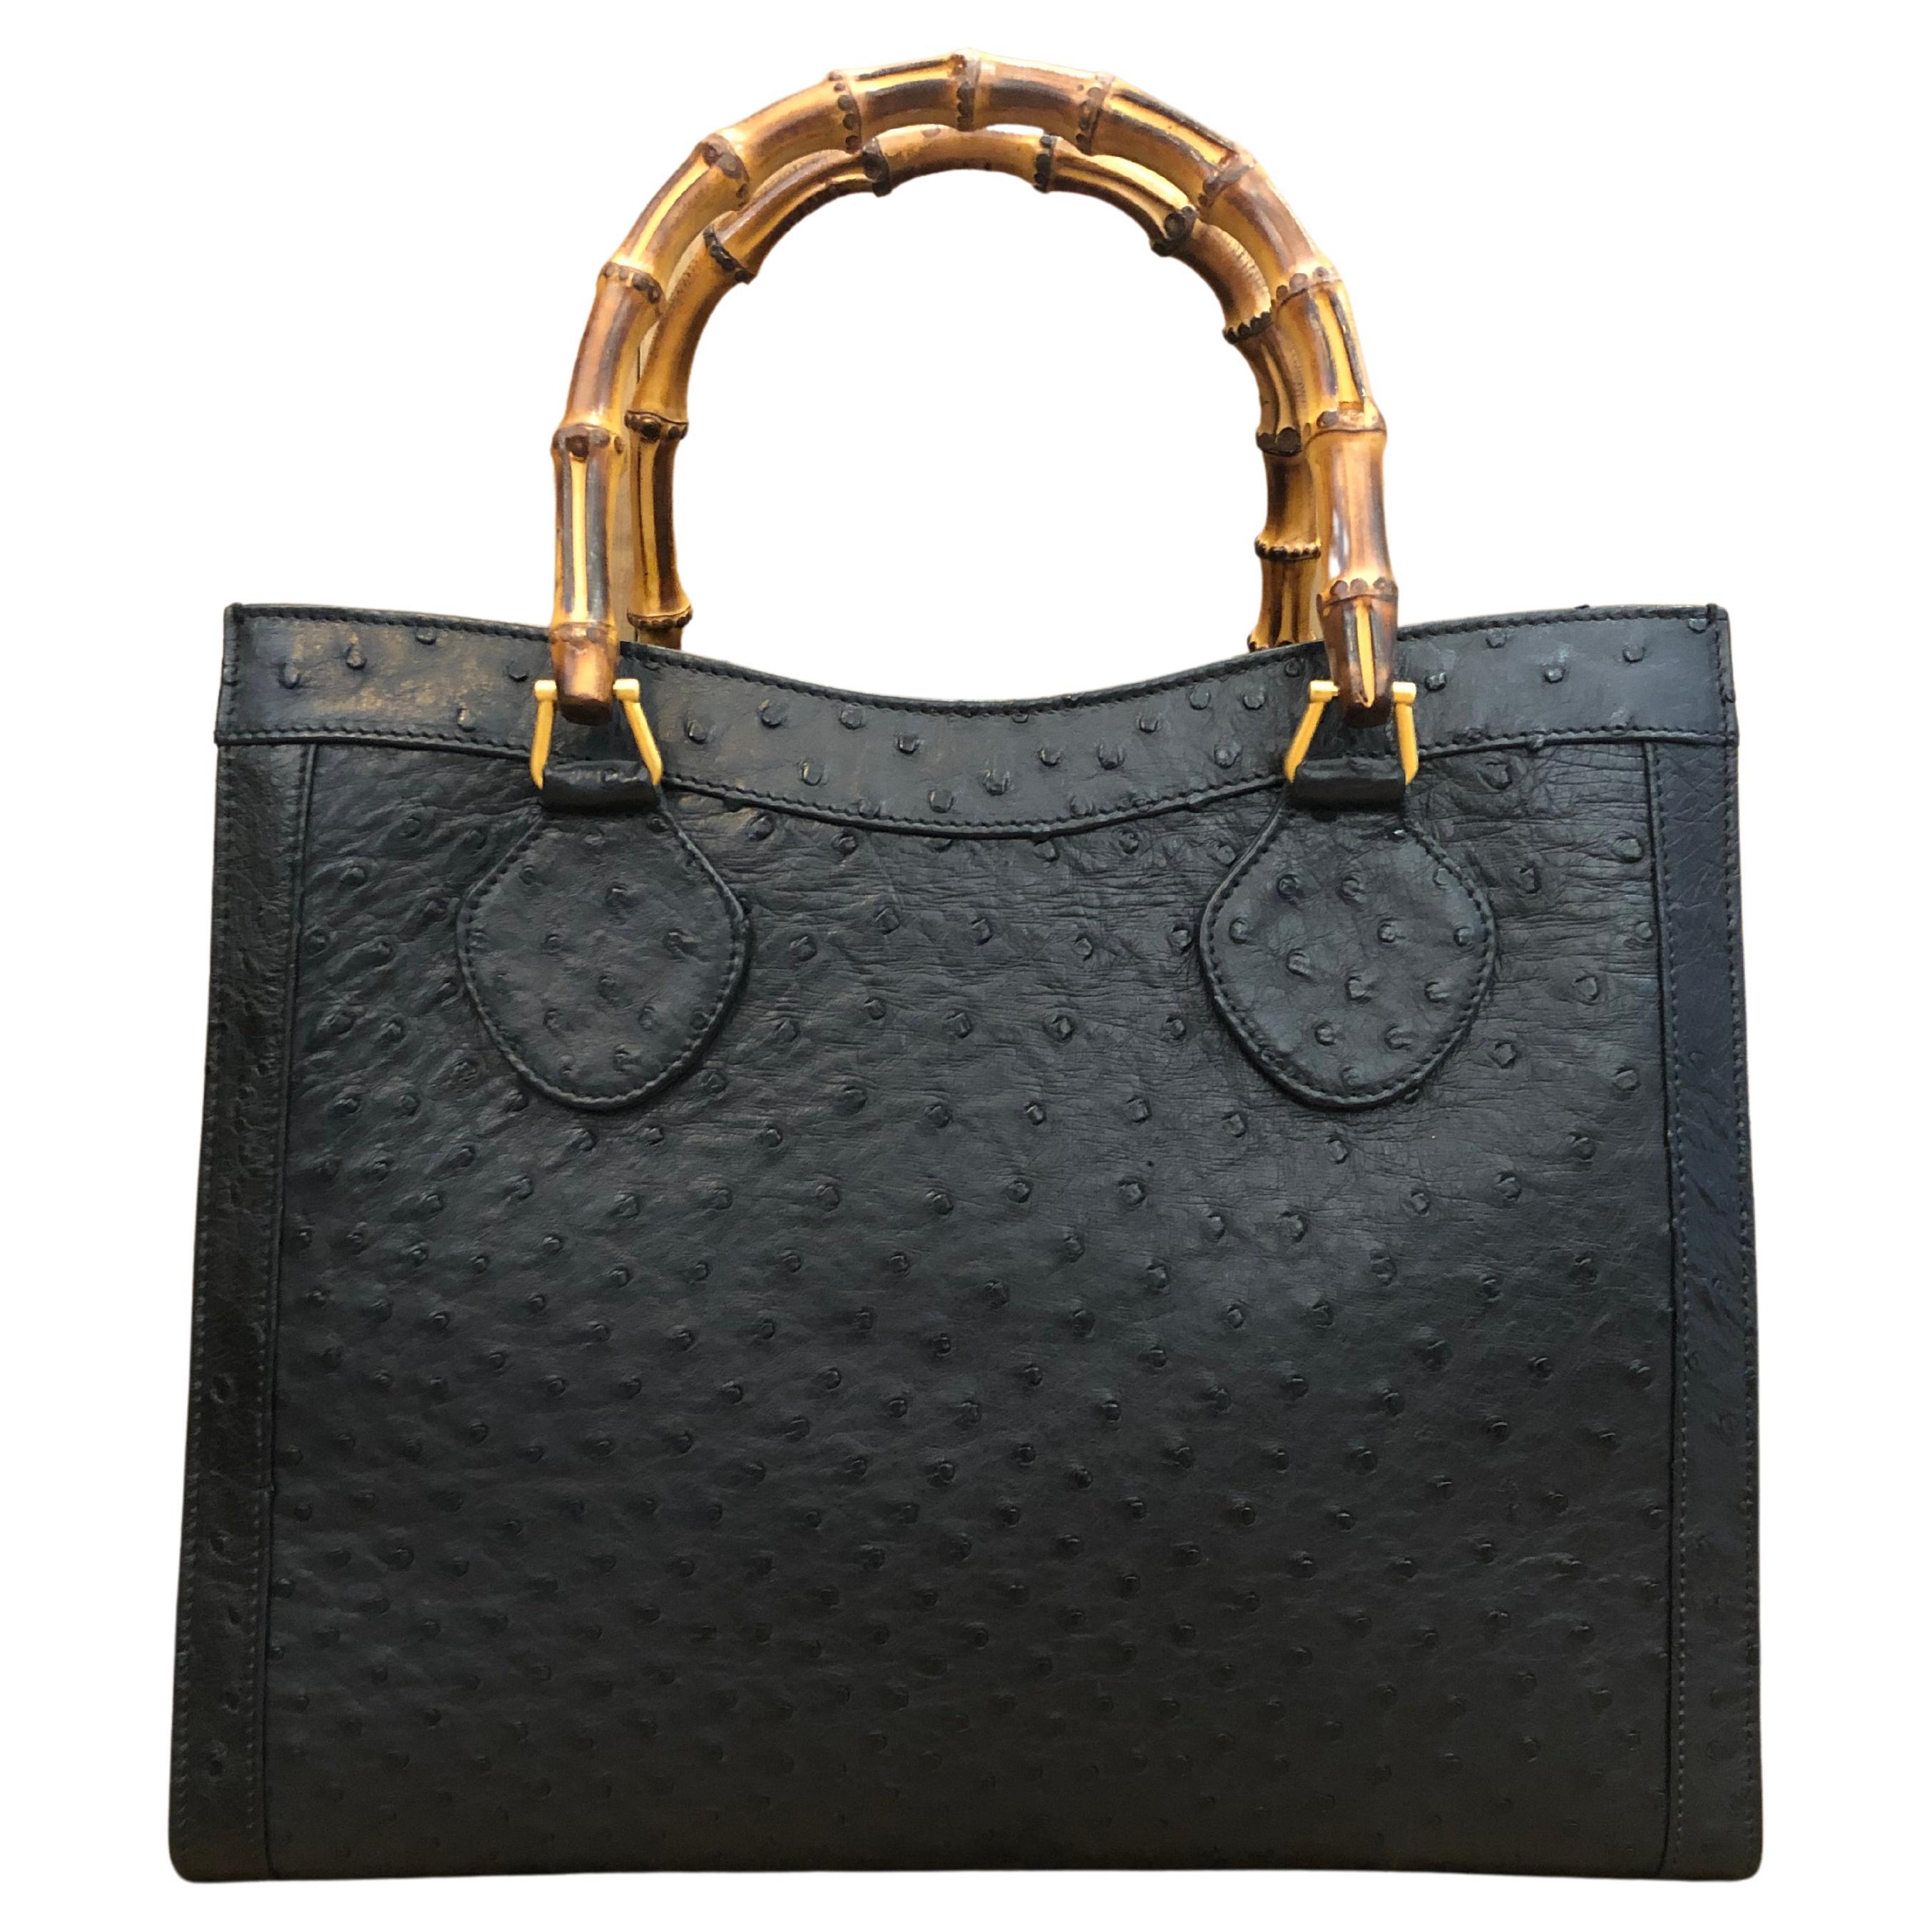 1990s Vintage GUCCI Black Ostrich Leather Bamboo Tote Diana Tote Bag (Medium)